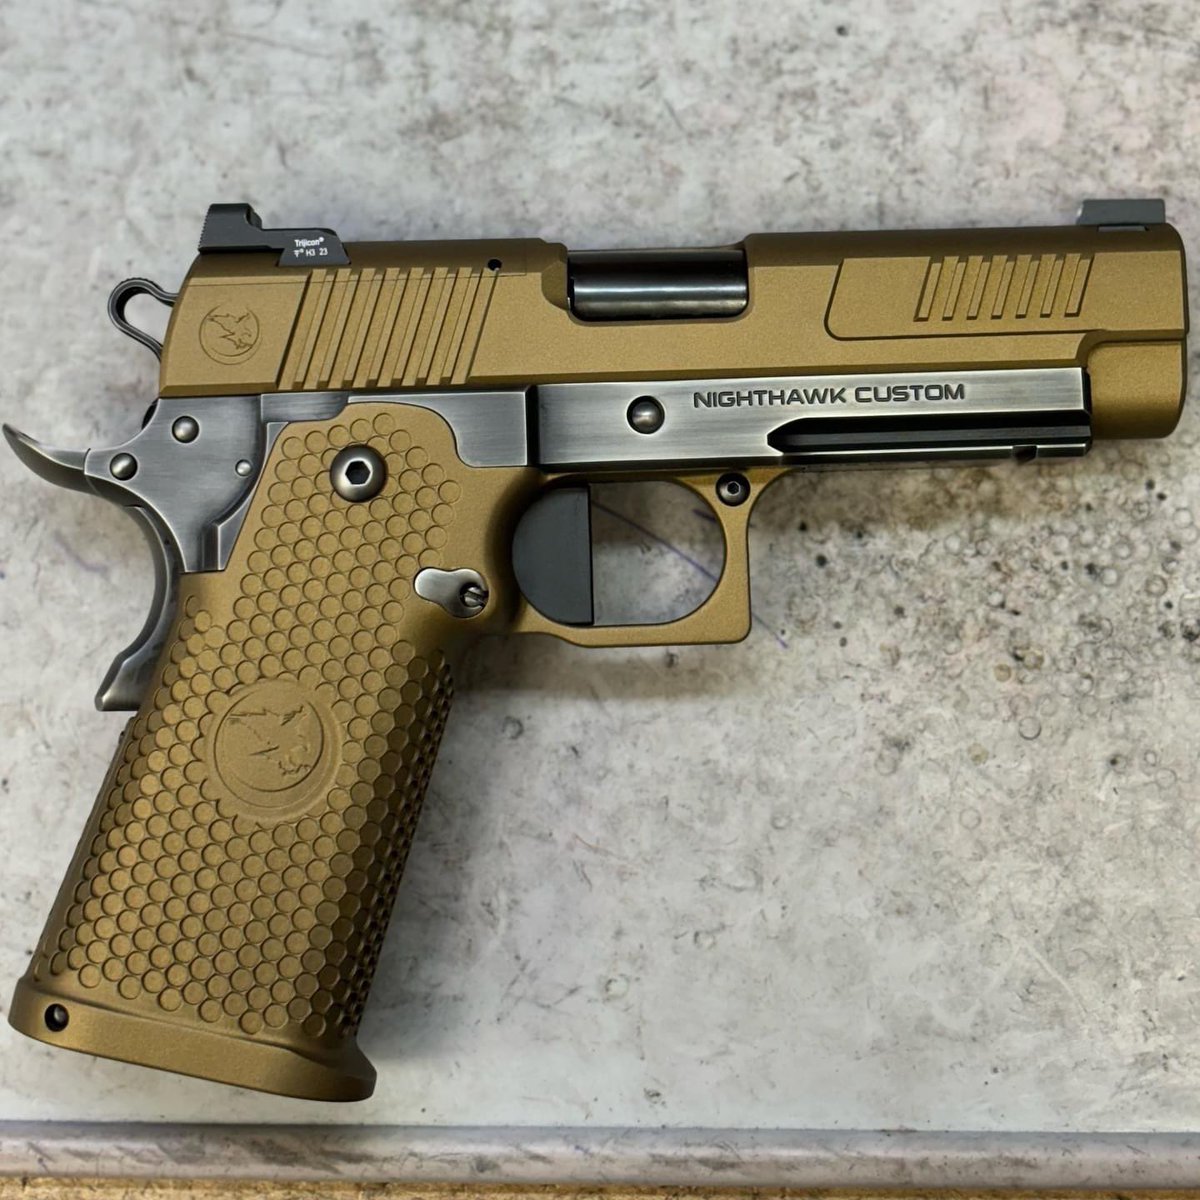 Check this out! Bad to the bone. 

Delegate Double Stack IOS (optic ready) in bronze and smoked nitride 🔥

#CustomPistol #HandFit #Custom1911 #DoubleStack #NighthawkCustom #Delegate #OneGunOneGunsmith #NighthawkCustomDelegate